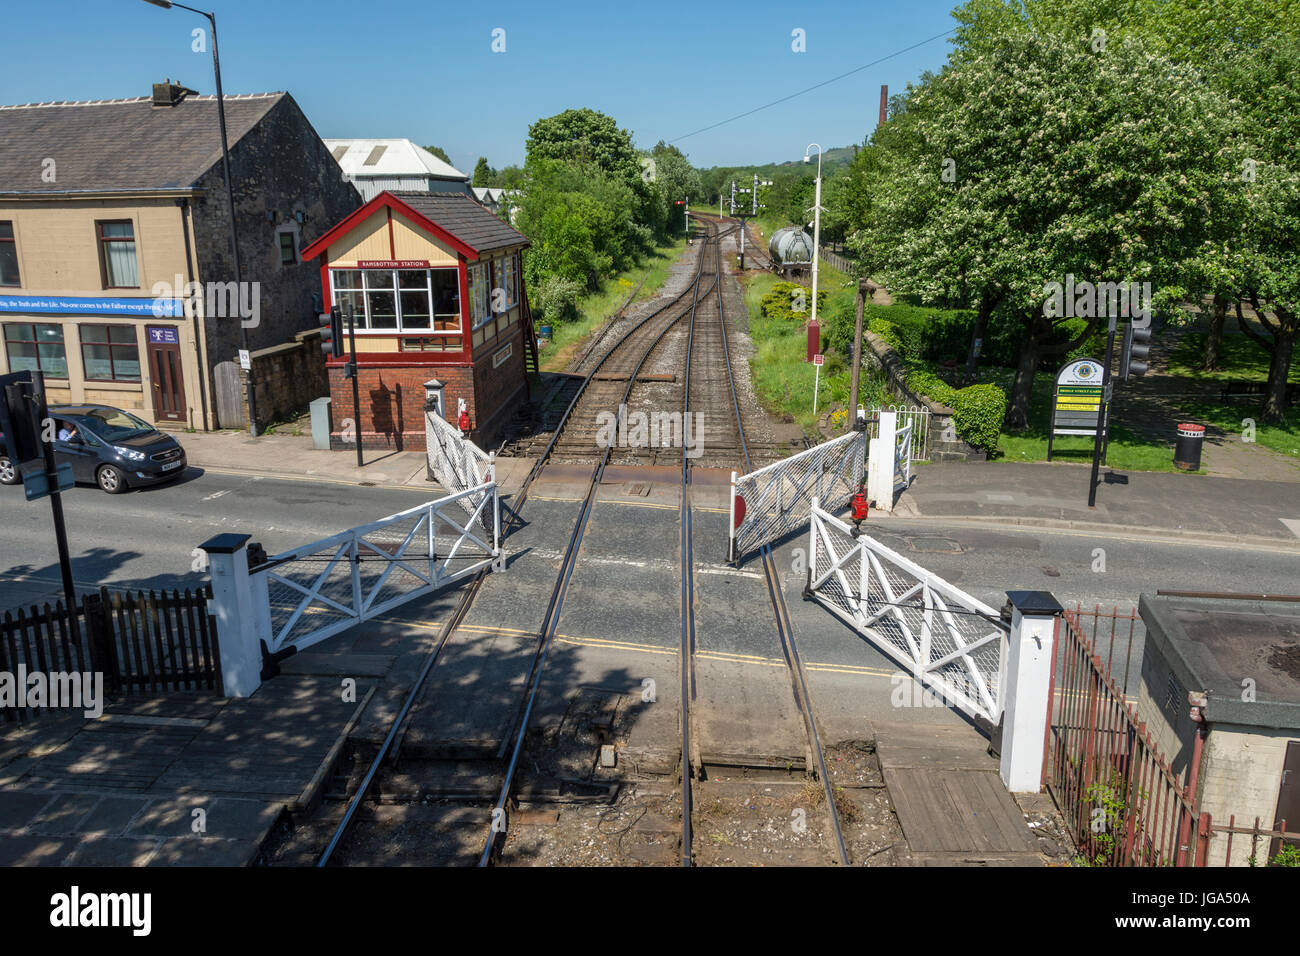 The signal box and level crossing (gates in operation), on the East Lancashire Railway at Ramsbottom, Greater Manchester, UK. Stock Photo